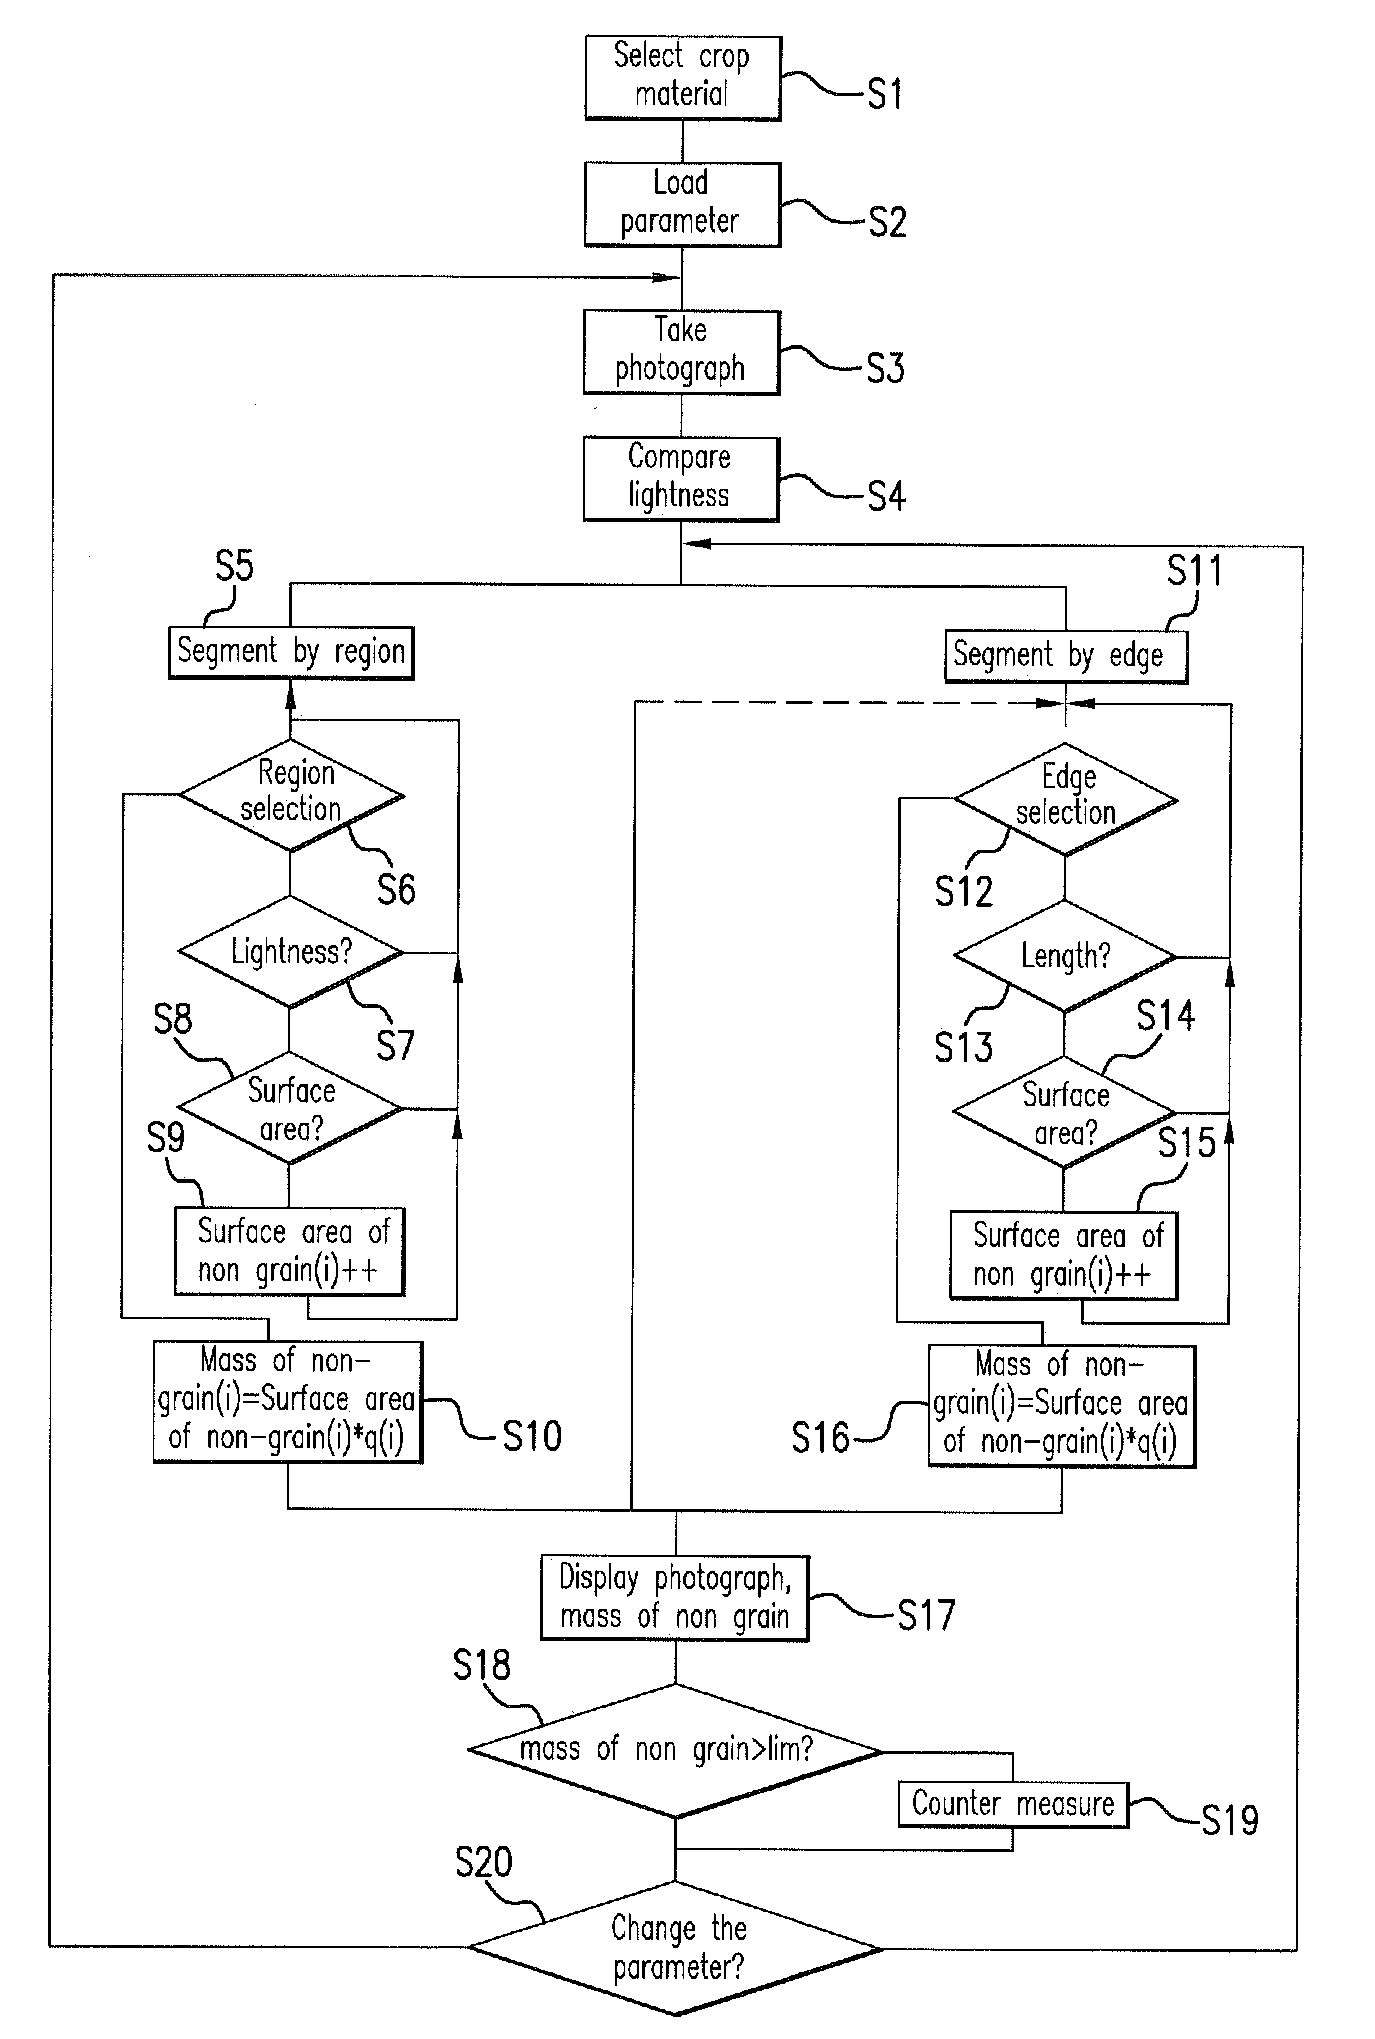 Method for monitoring the quality of crop material